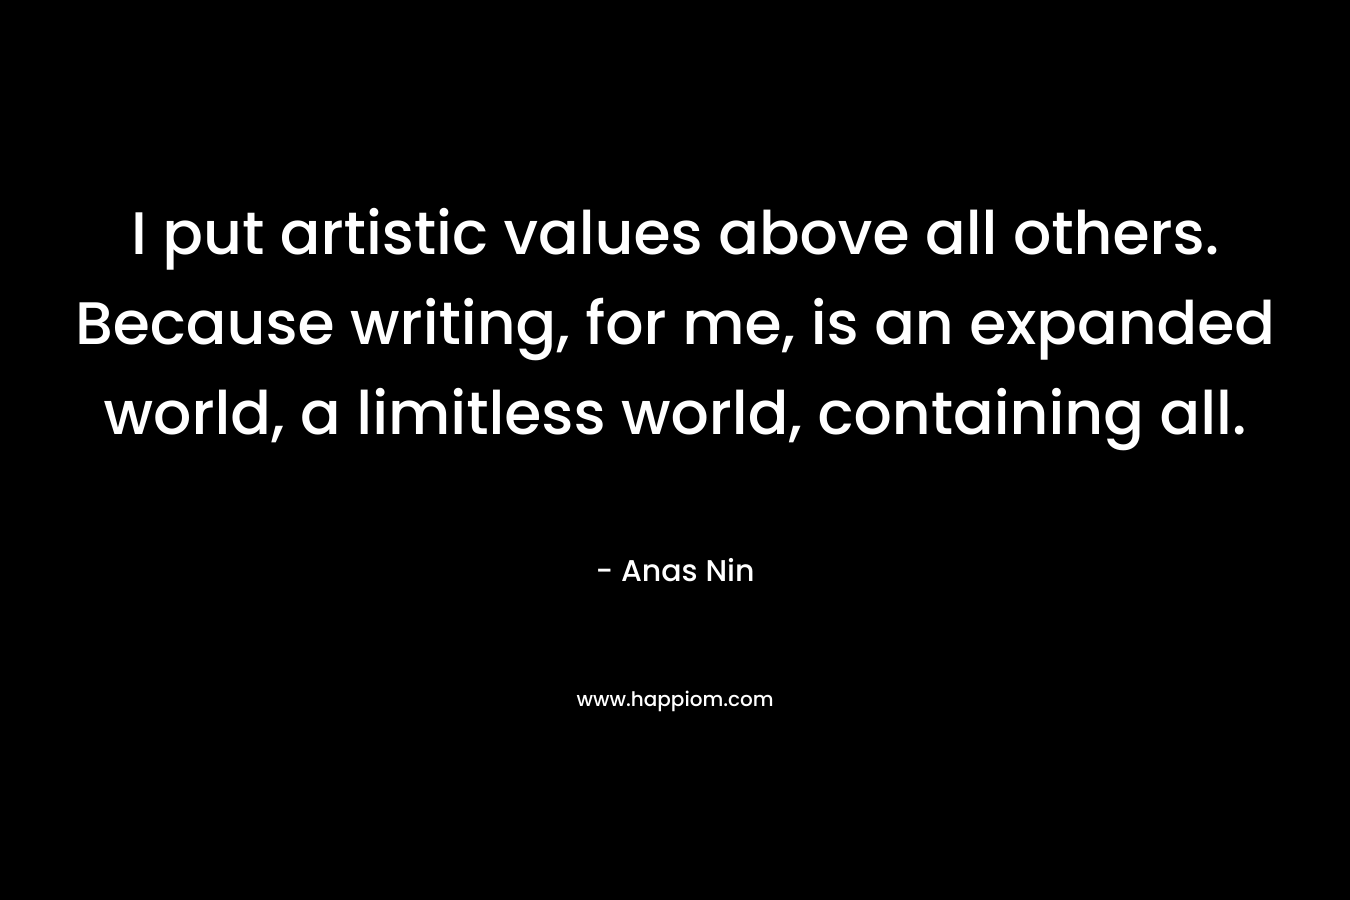 I put artistic values above all others. Because writing, for me, is an expanded world, a limitless world, containing all.